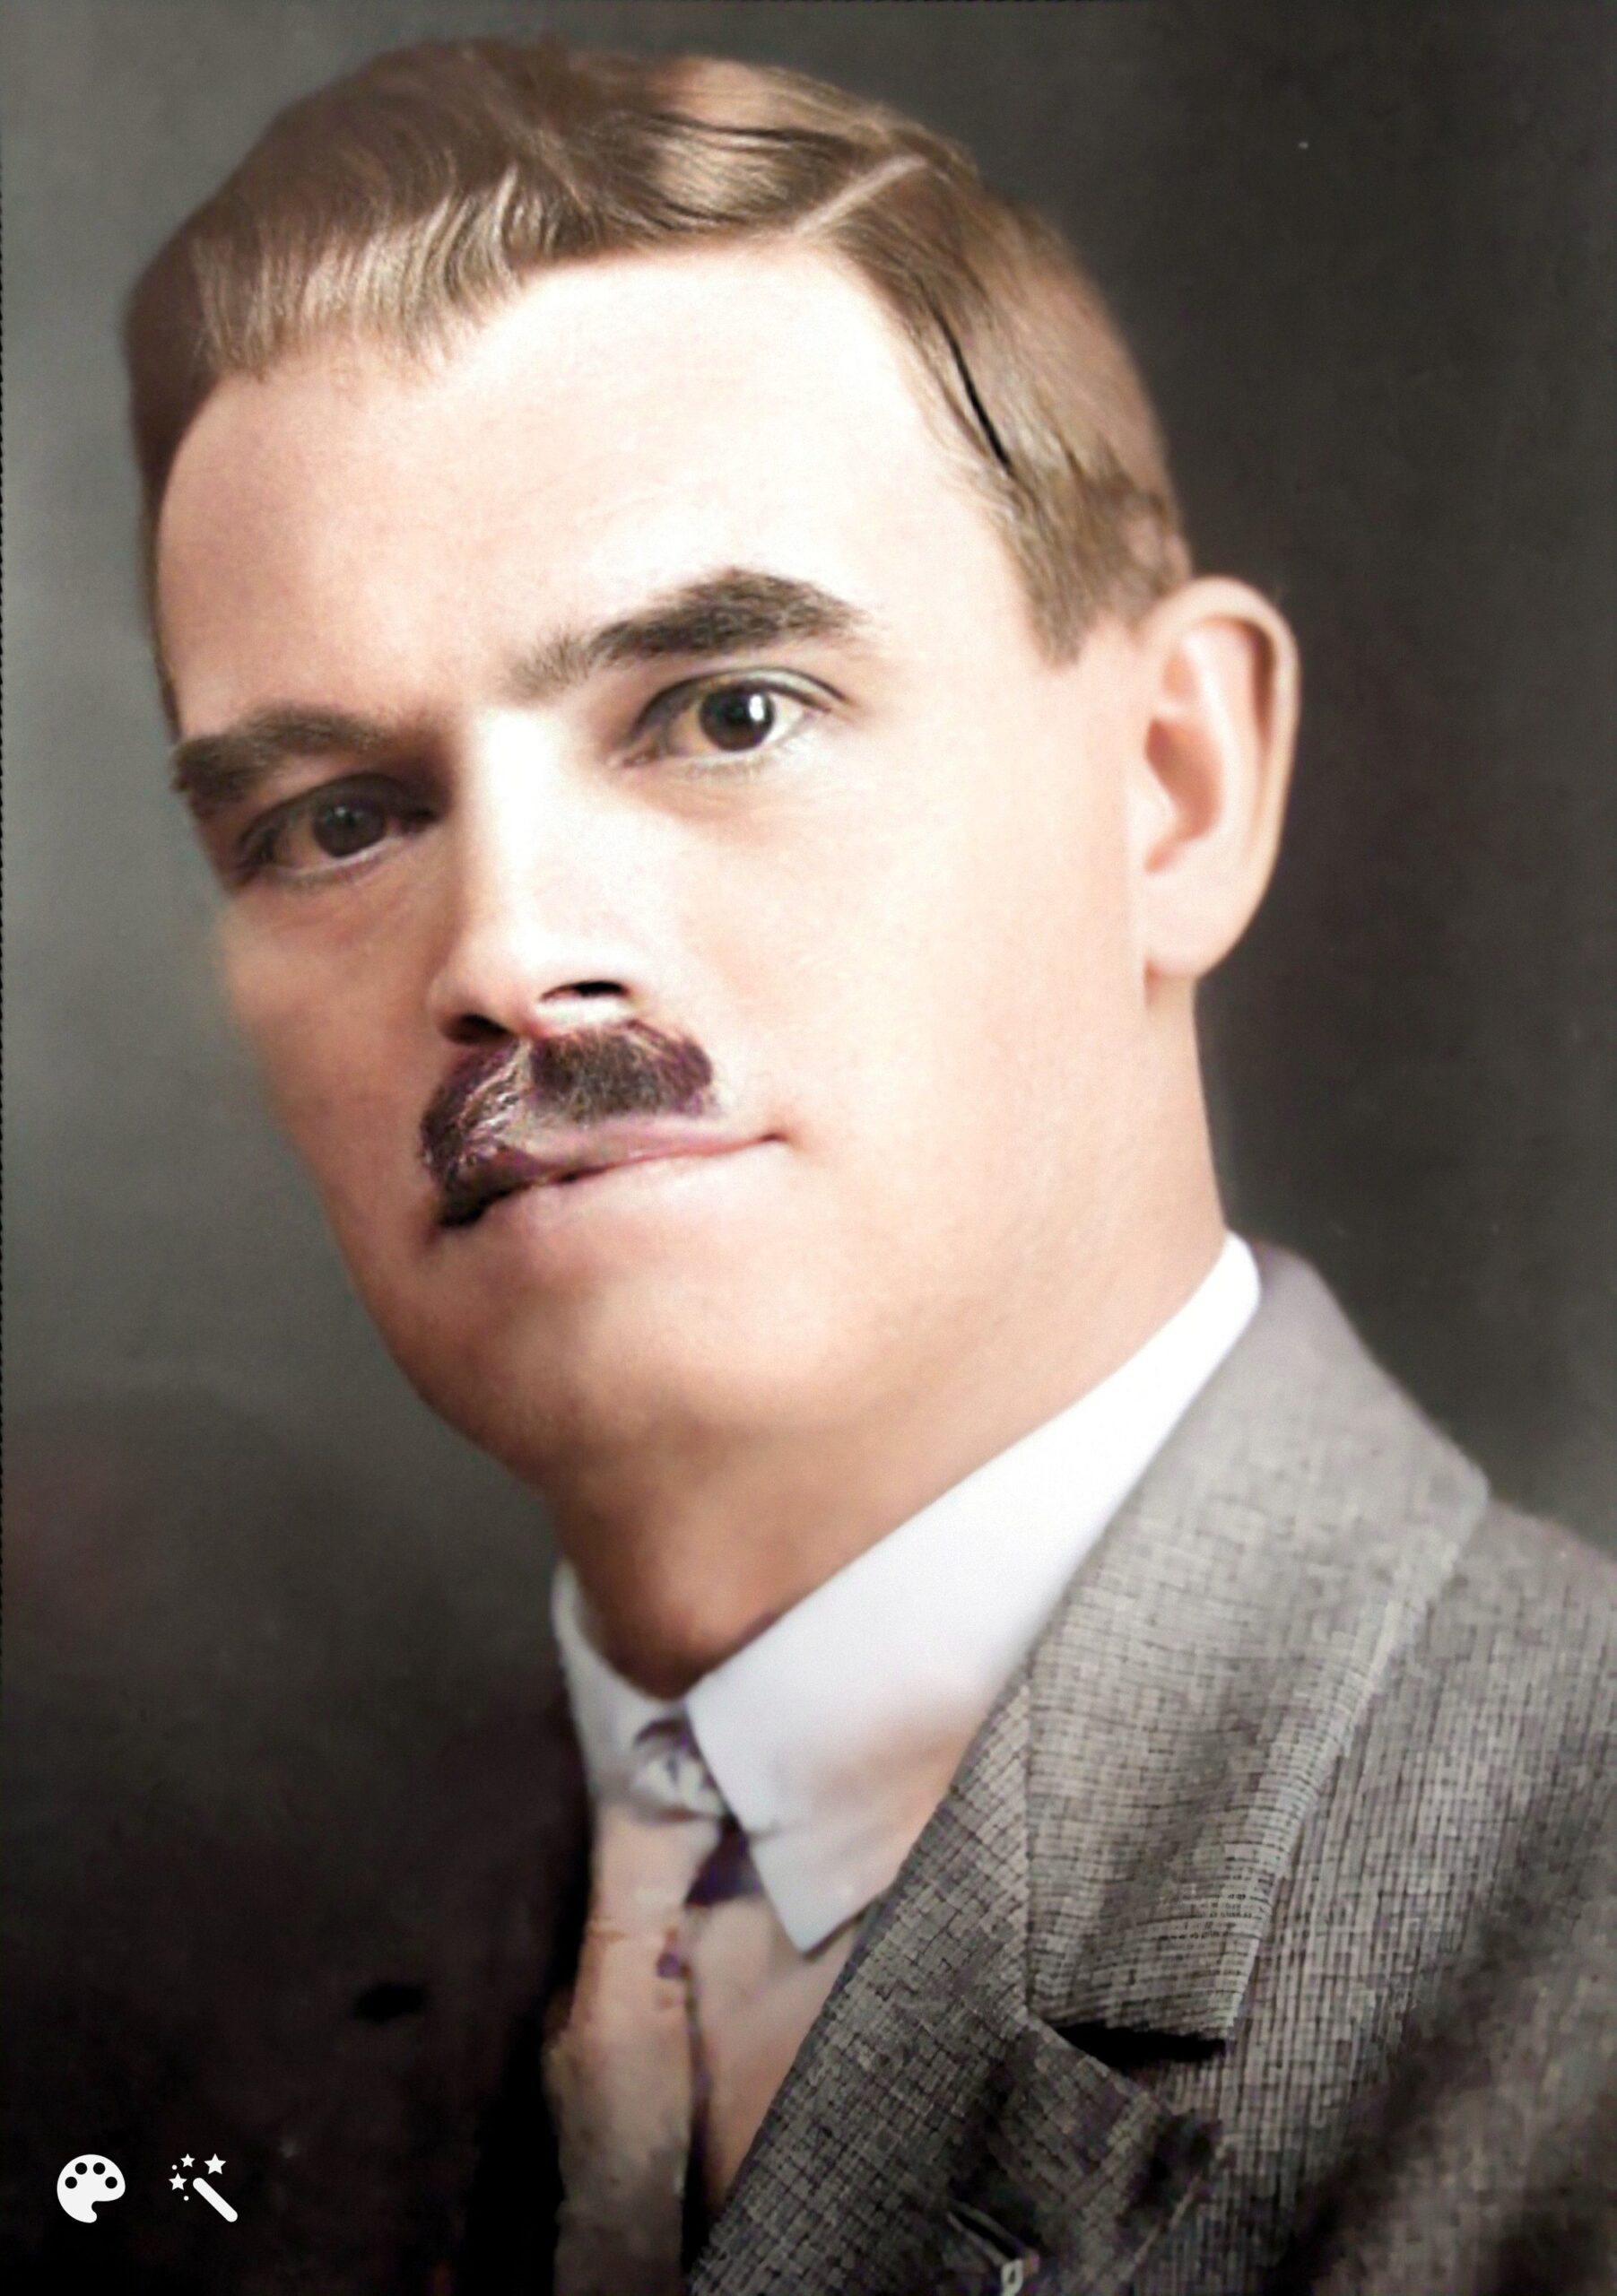 Joseph Renault, their father (photo colorized and enhanced by MyHeritage).